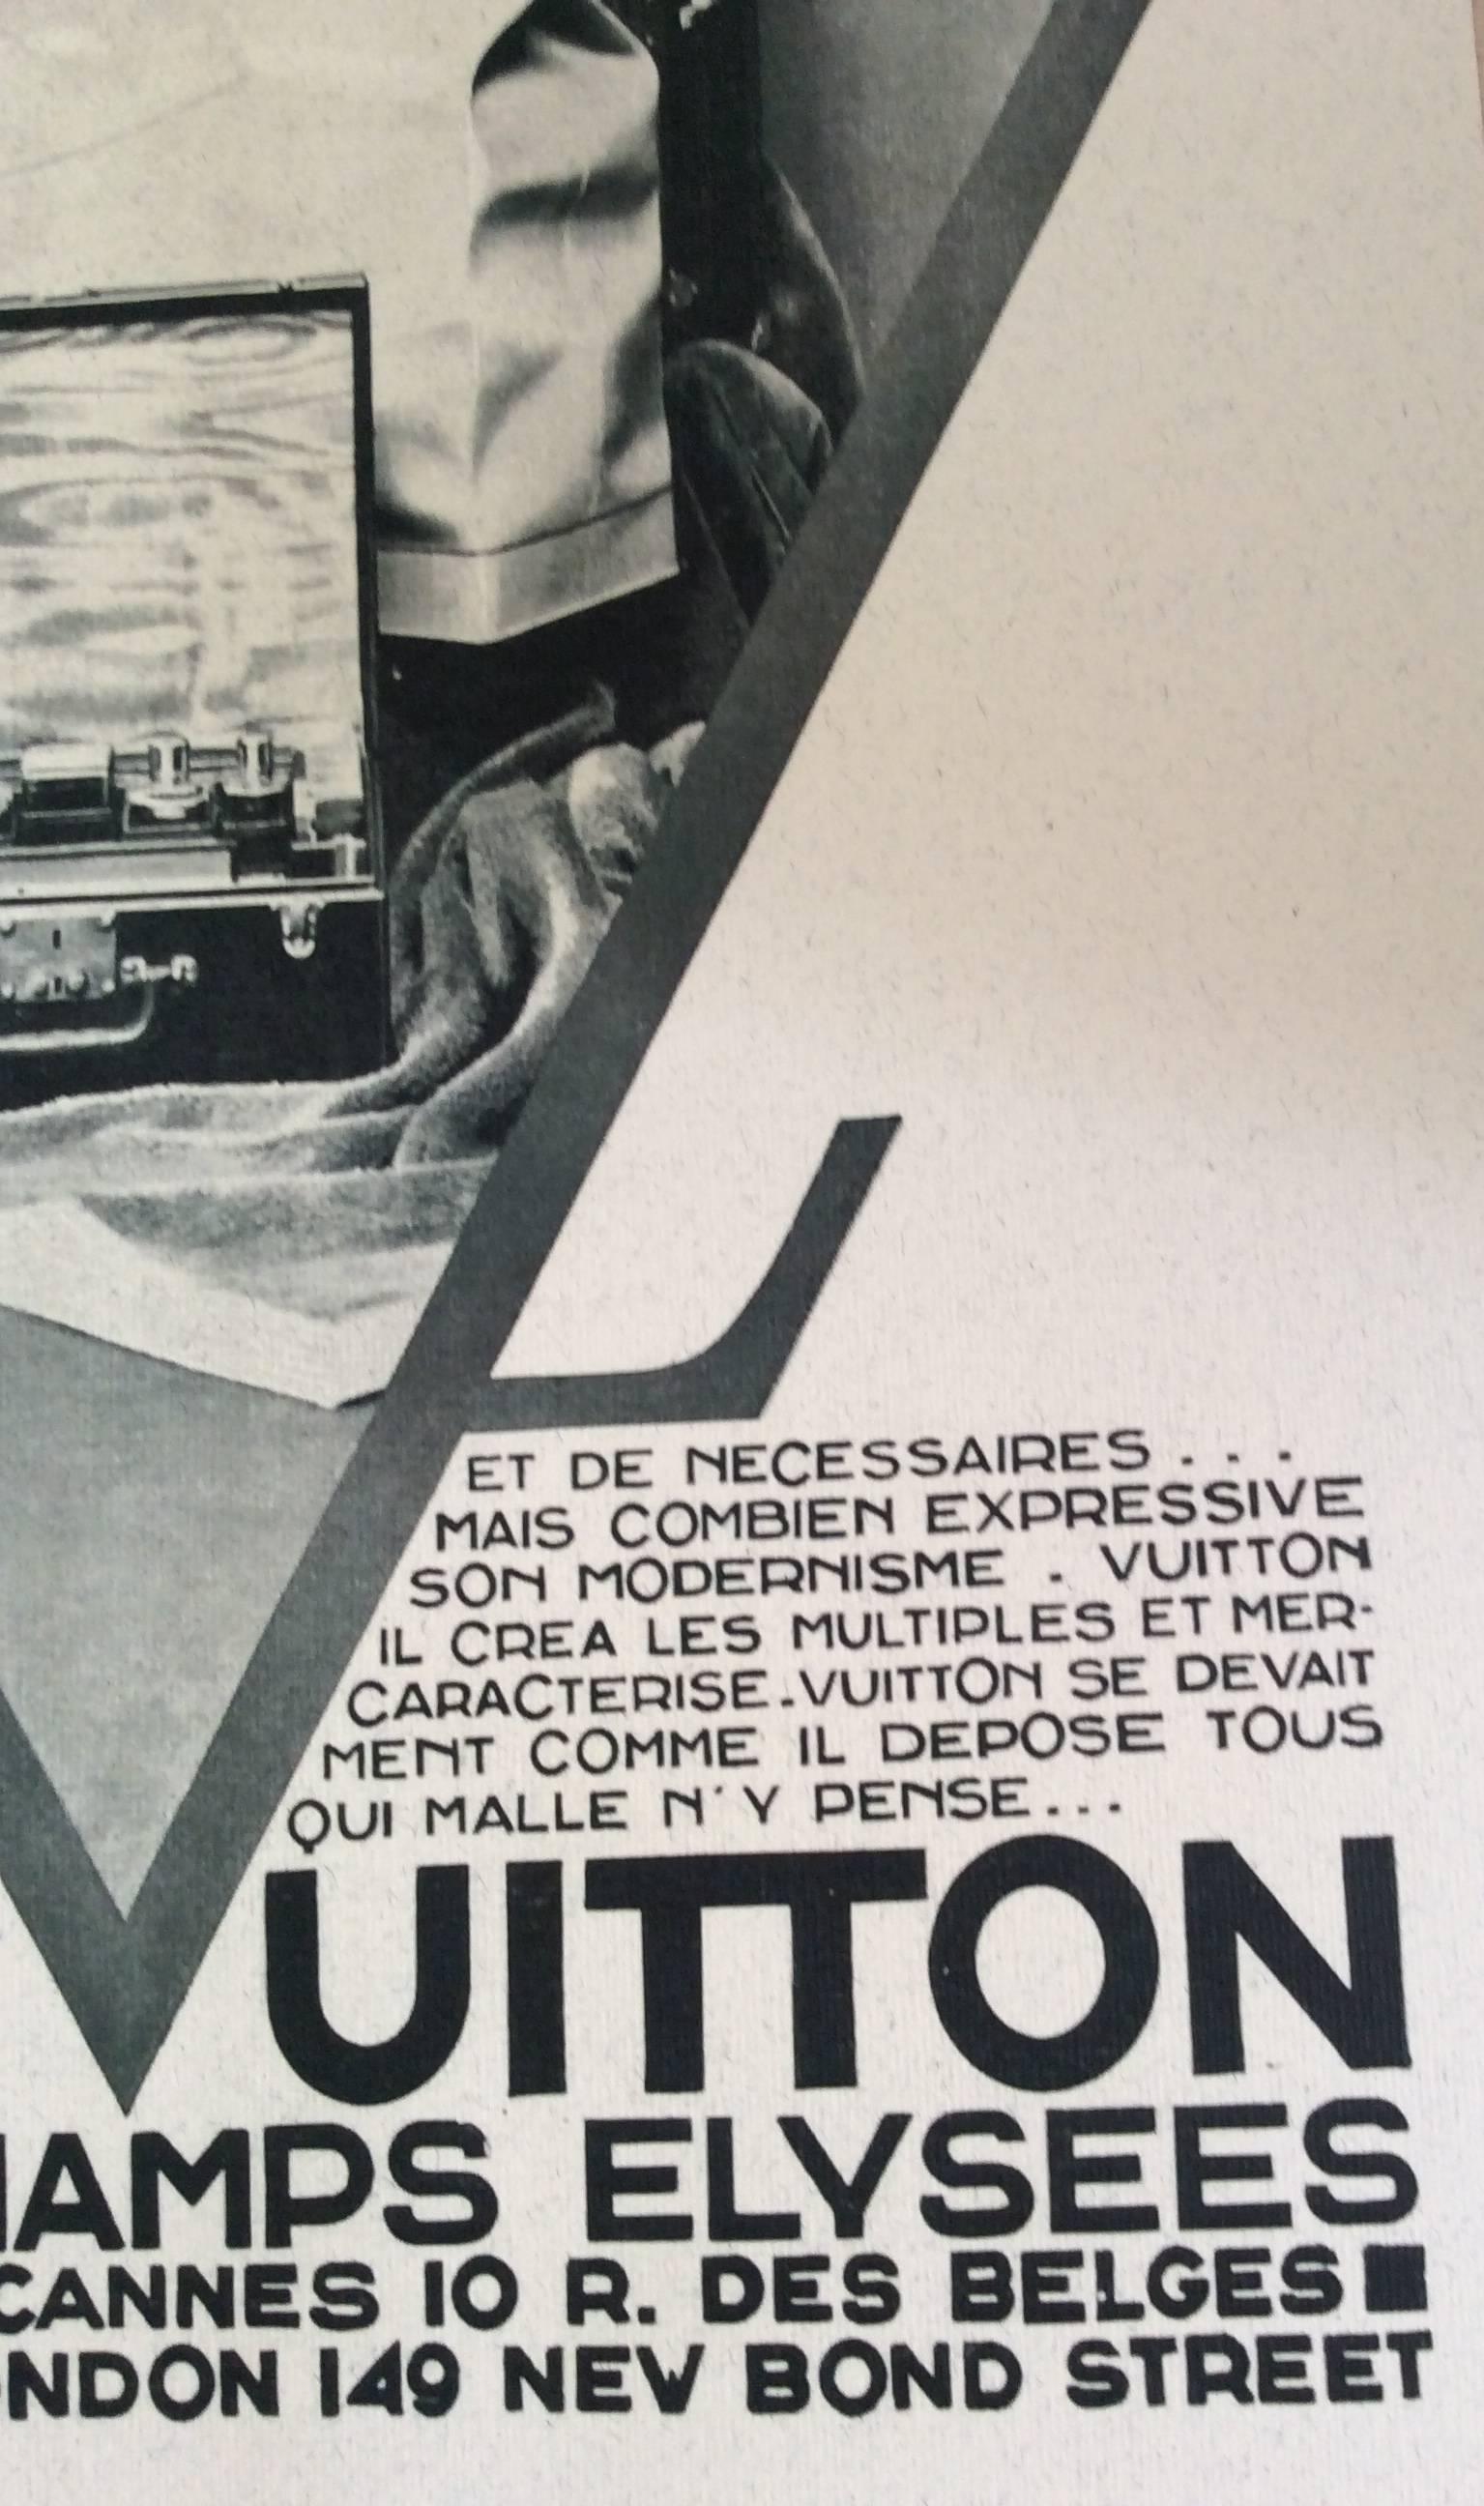 Louis Vuitton Vintage Ad Print - 1930's For Sale at 1stDibs